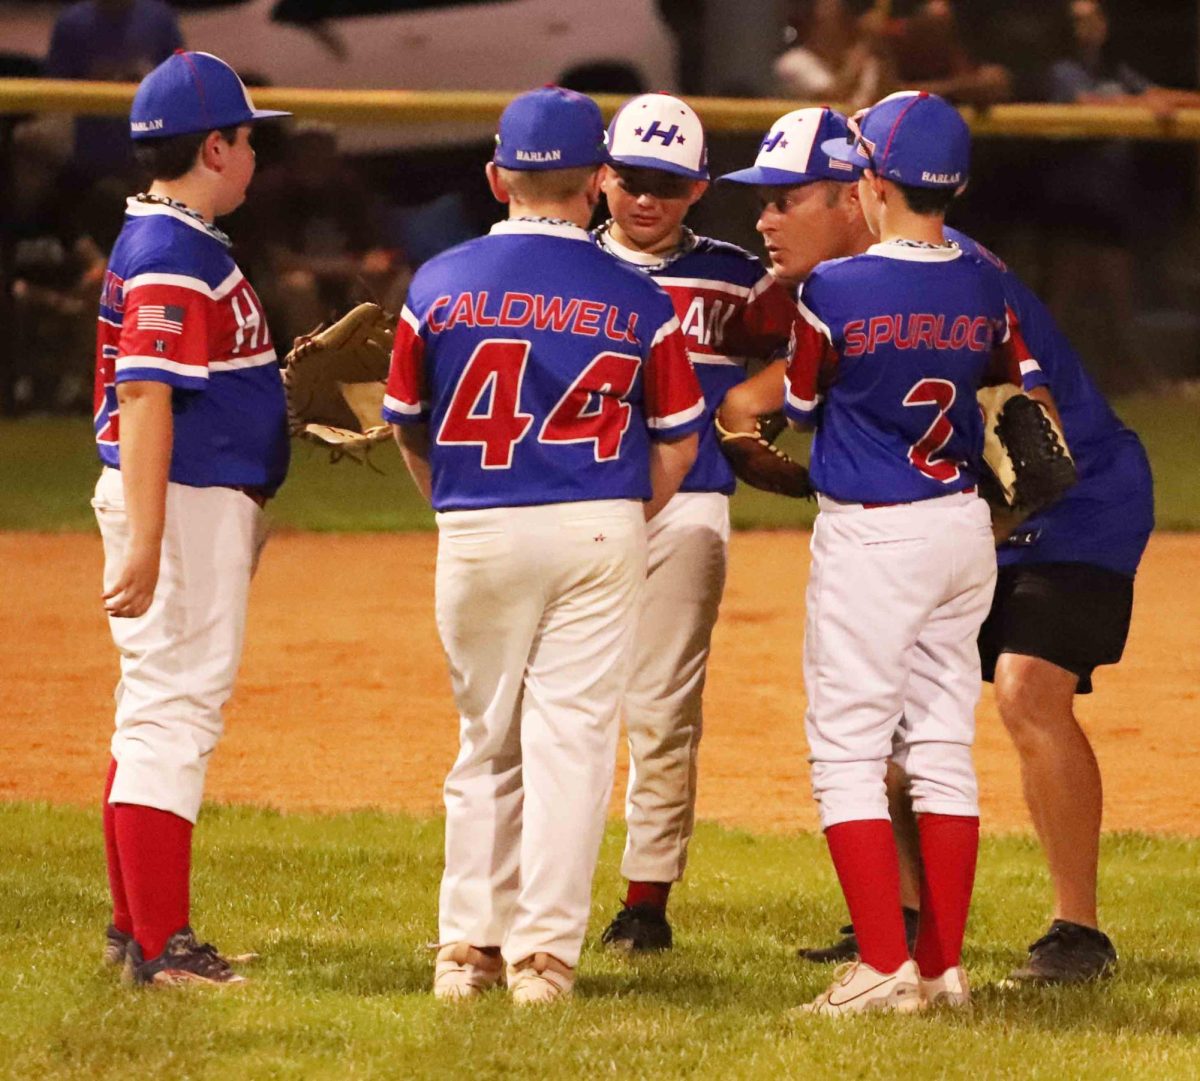 Harlan All Stars coach Anthony Nolan talked with his infielders during a break in District 4 Tournament action Monday. Harlan rallied with seven runs in the sixth inning to pull even before falling 8-7 to Williamsburg.